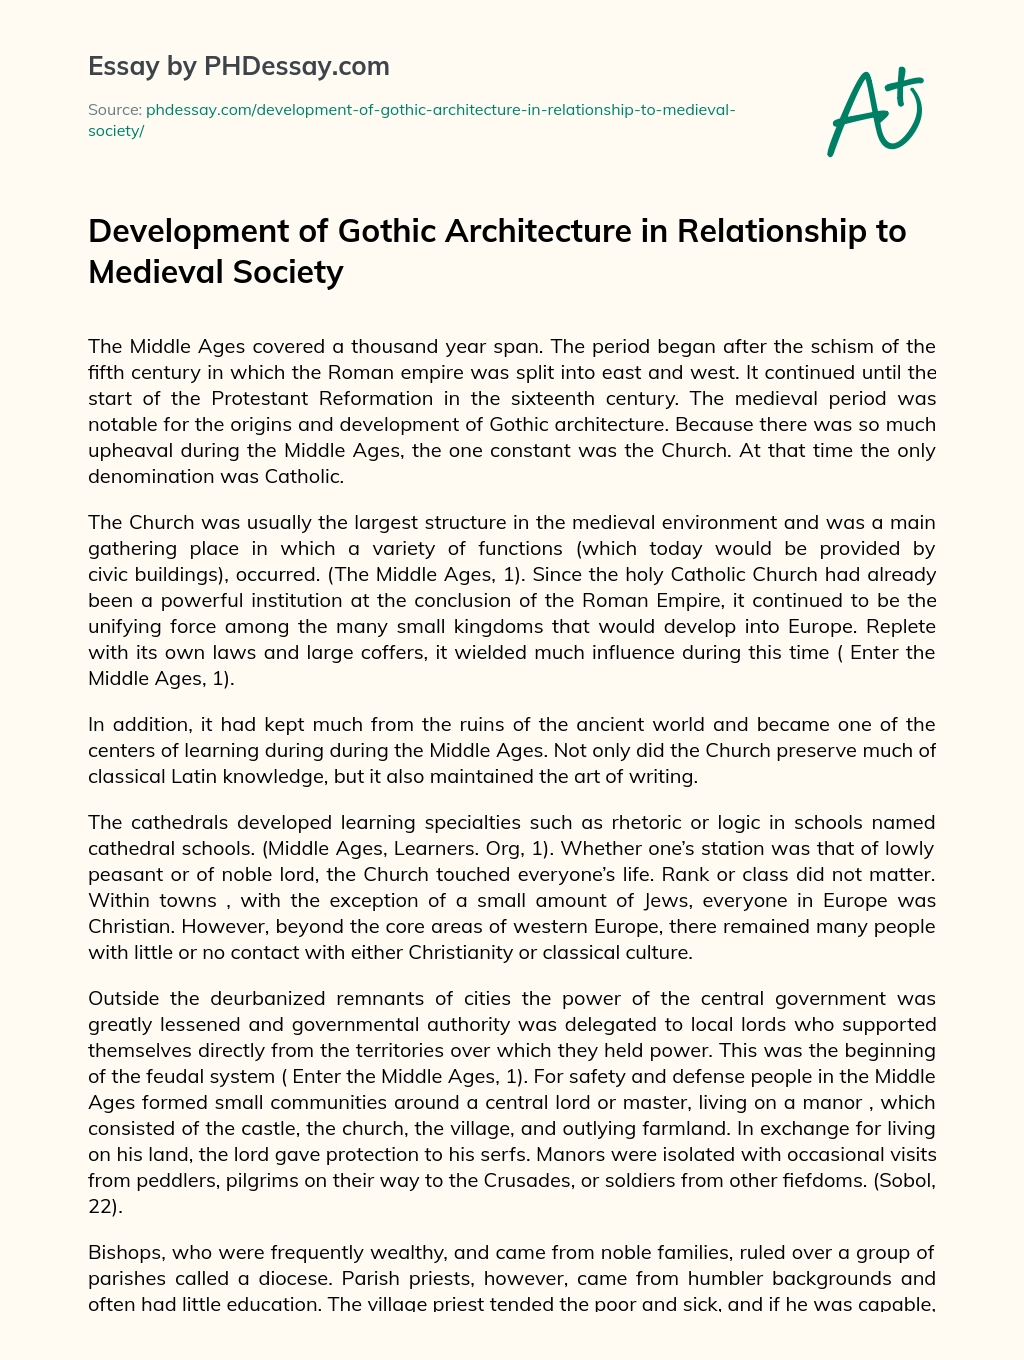 Development of Gothic Architecture in Relationship to Medieval Society essay